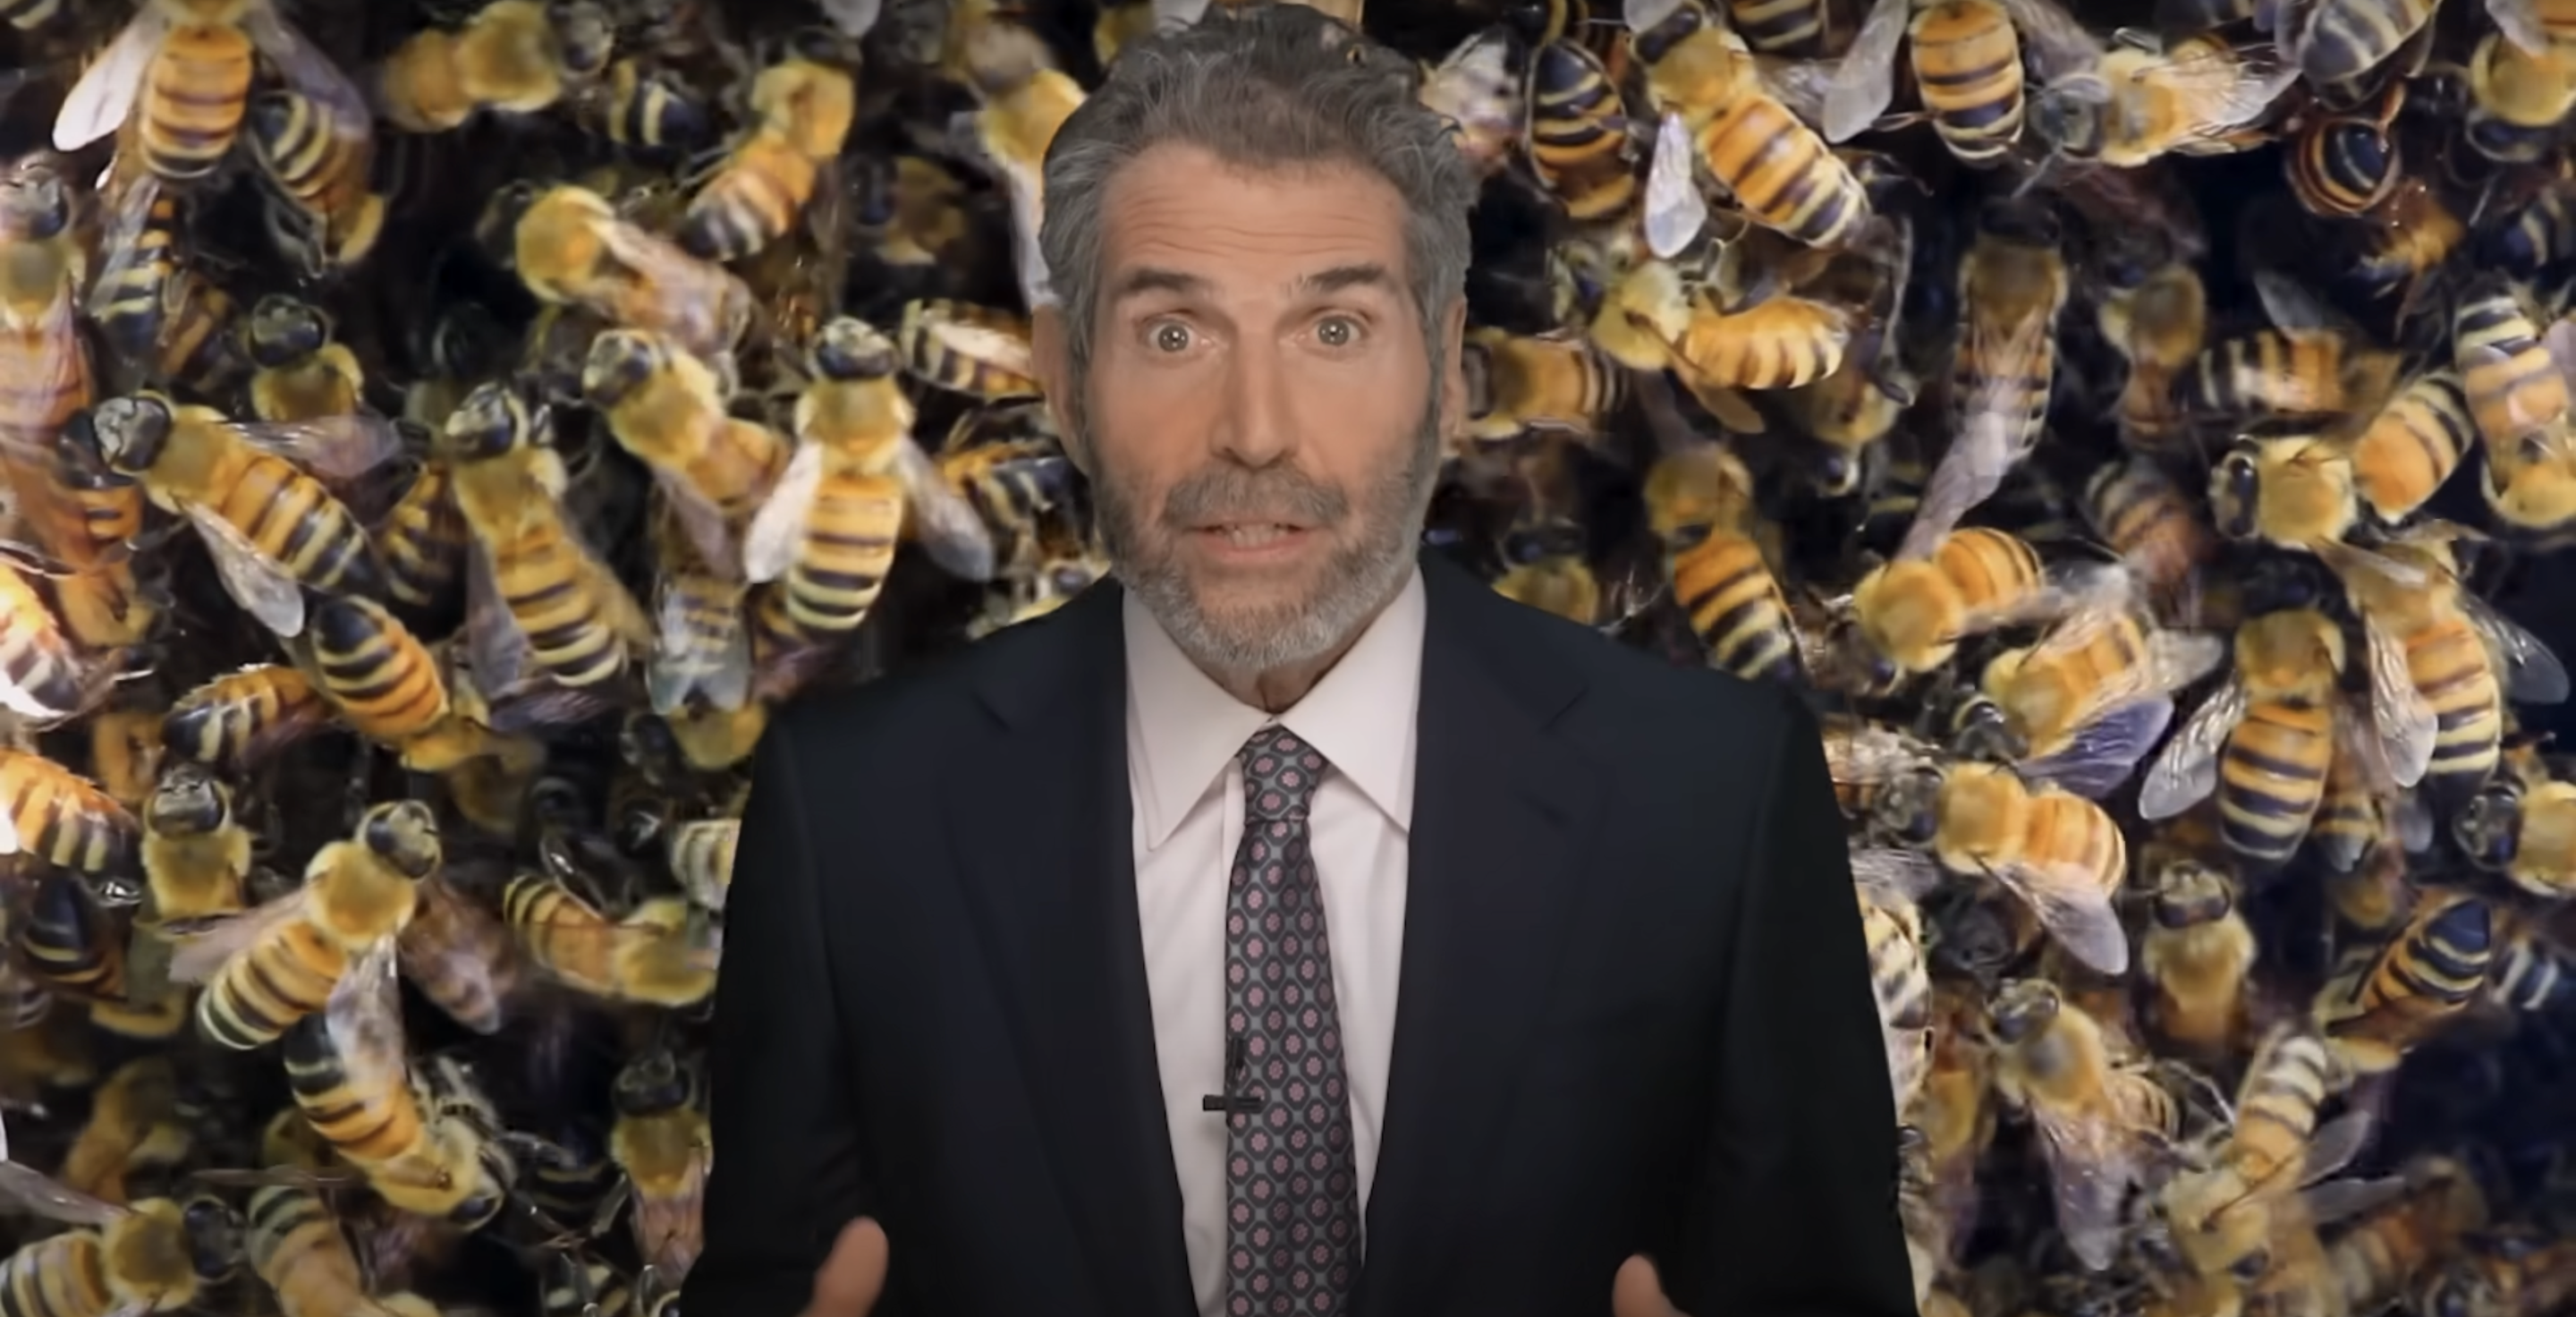 How the Media Manufactured Panic Over Bees